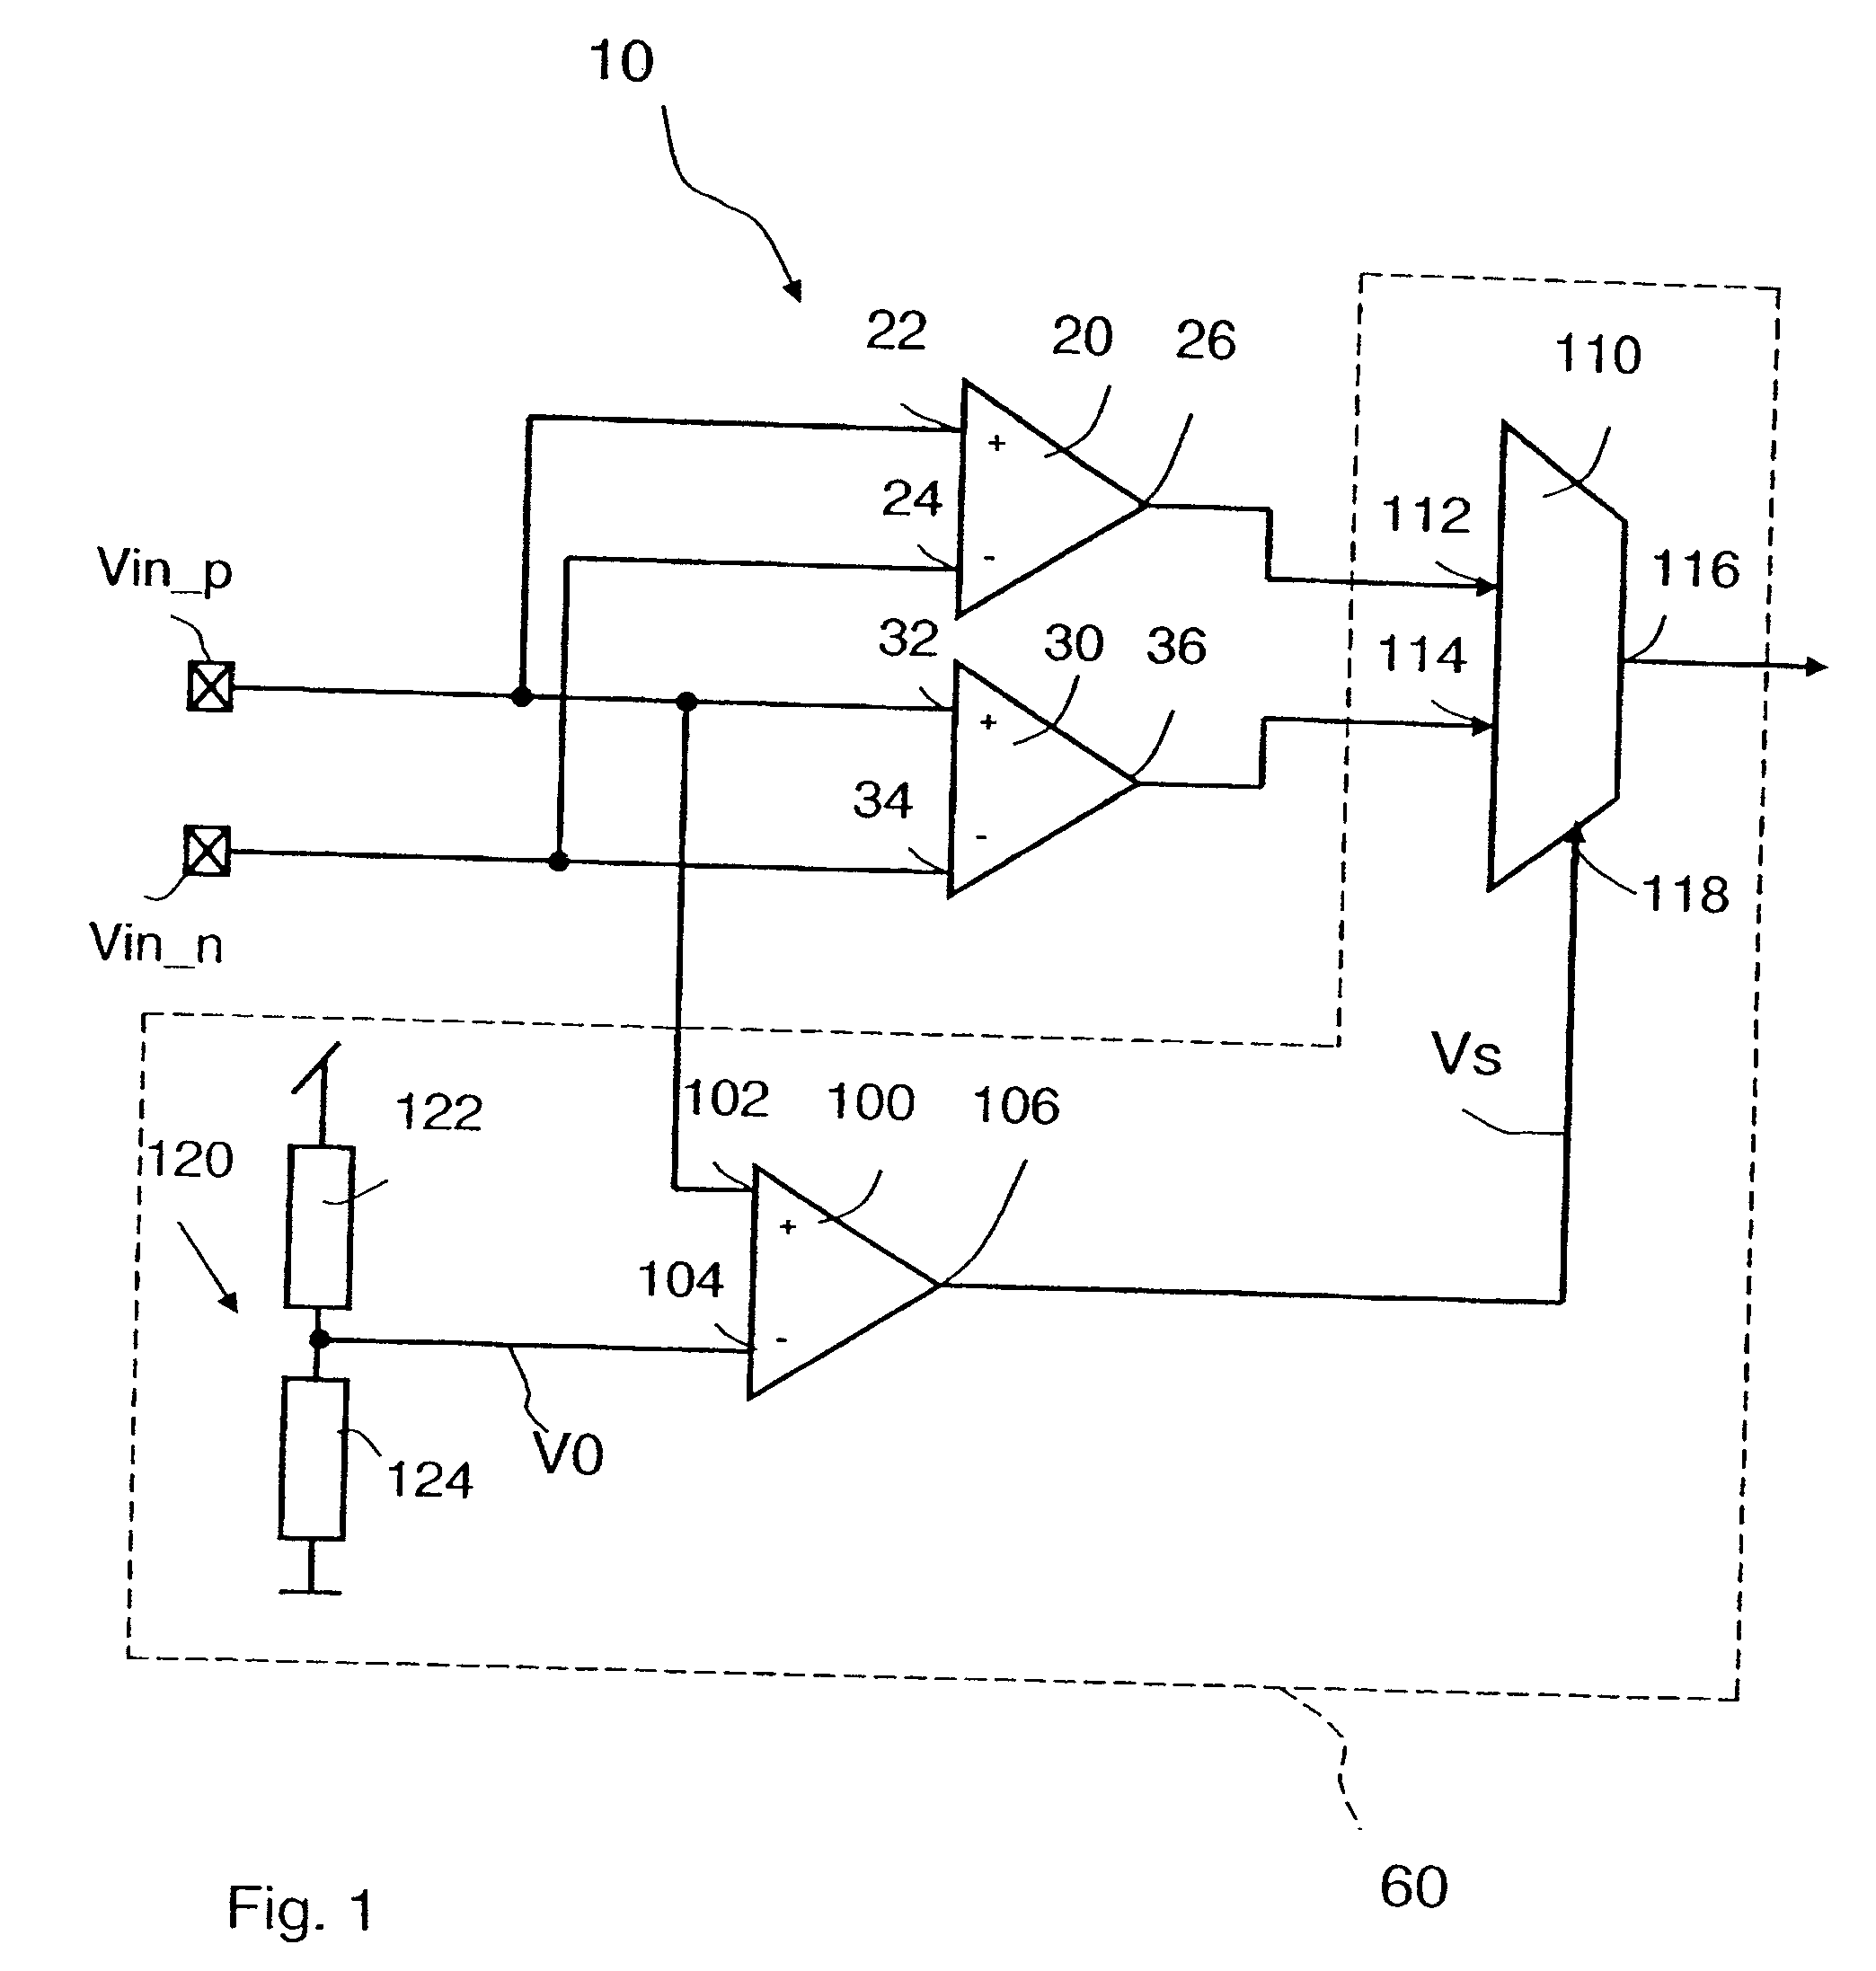 Comparator Circuit and Method for Operating a Comparator Circuit